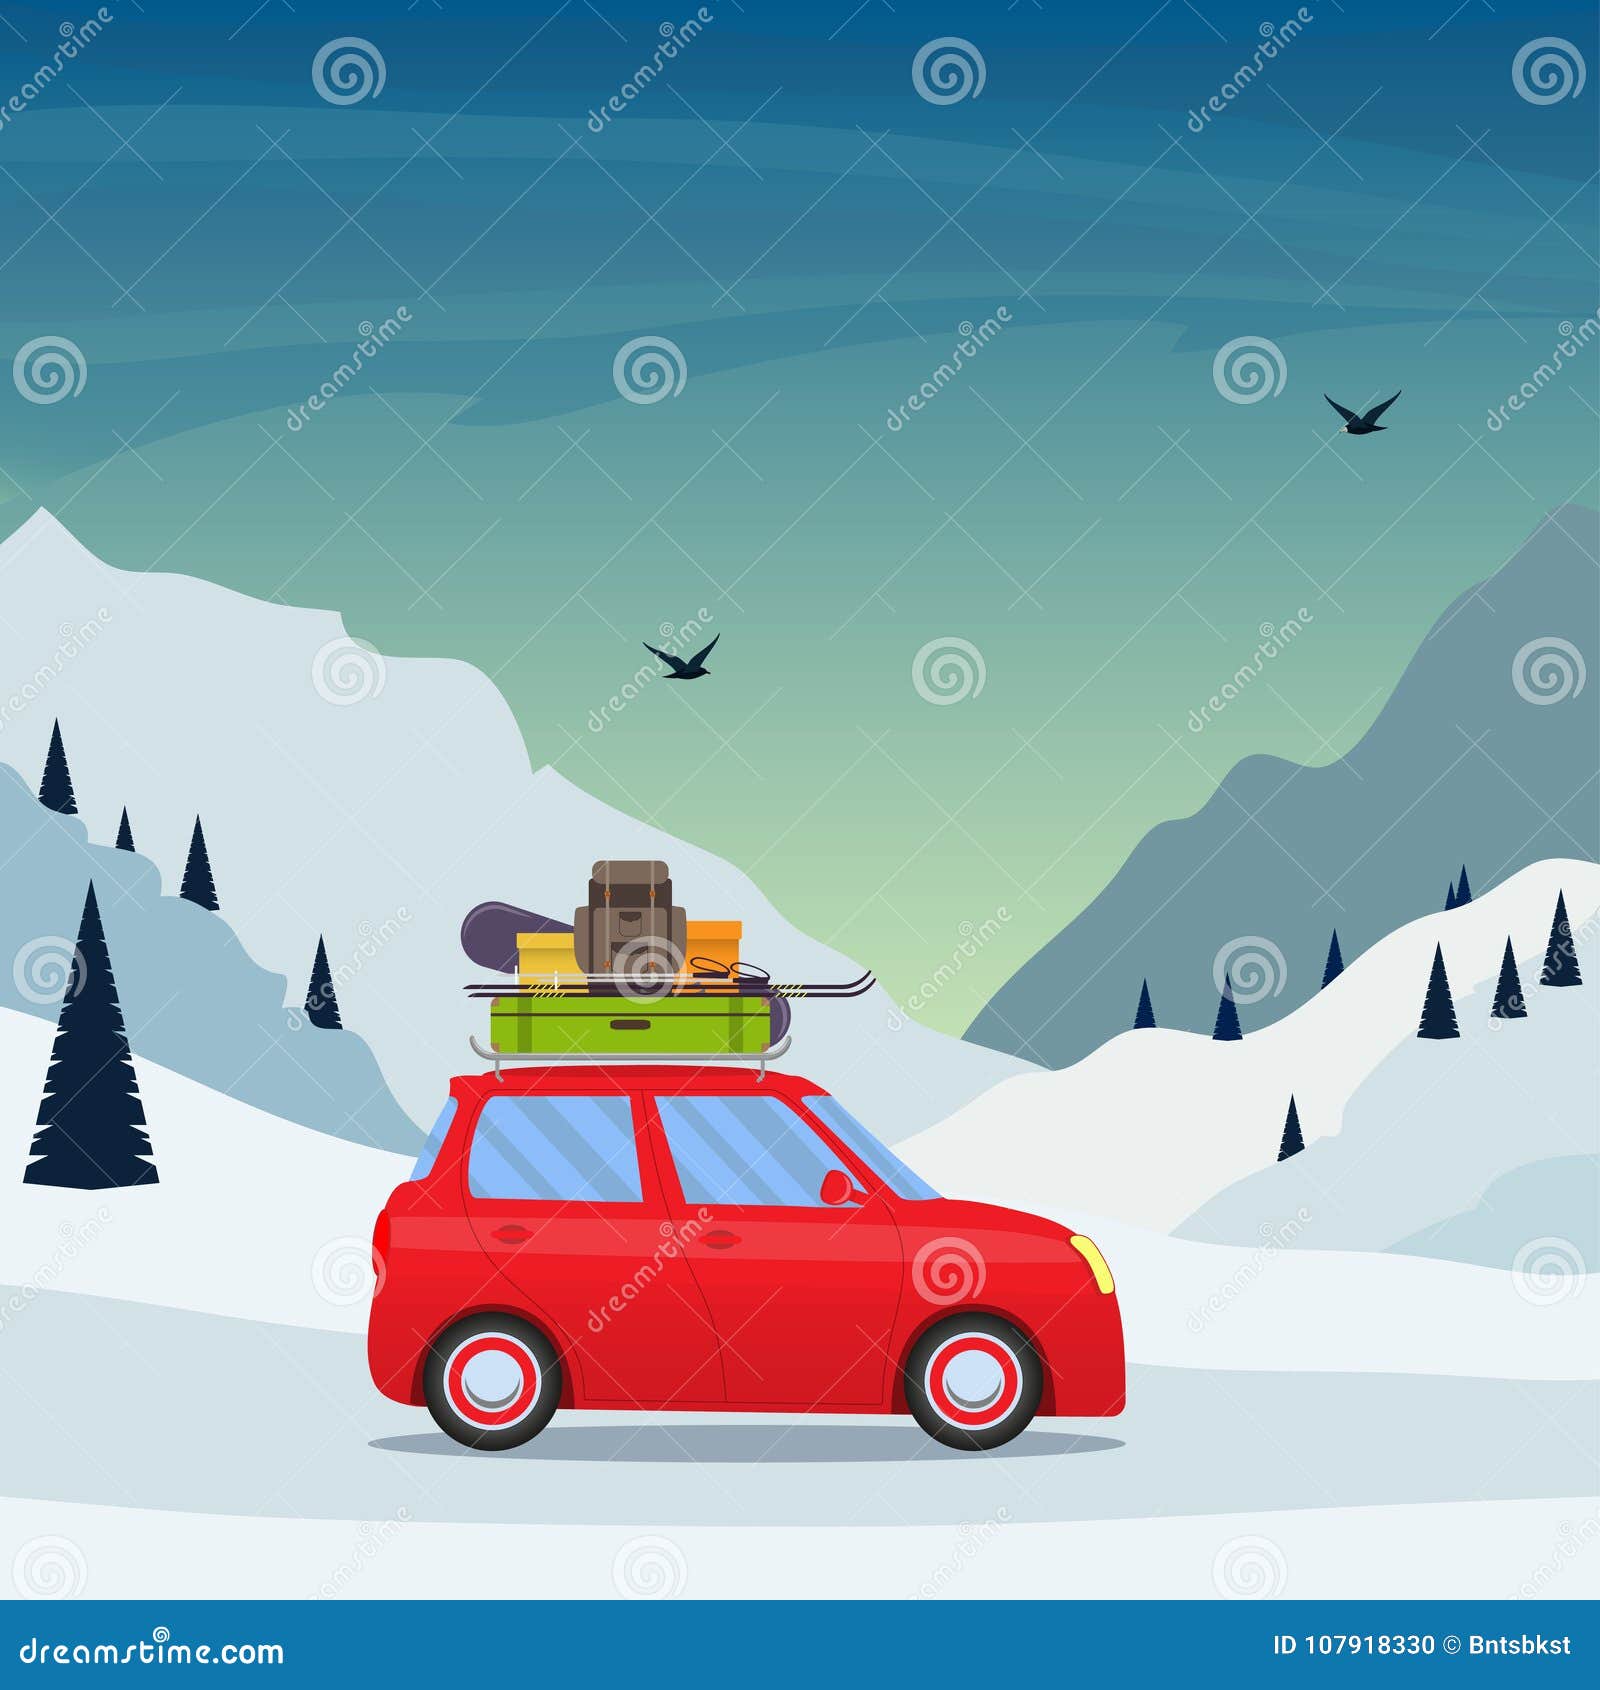 https://thumbs.dreamstime.com/z/winter-skiing-holiday-trip-to-mountains-cute-small-car-ski-snowboard-backpack-suitcase-roof-vector-107918330.jpg